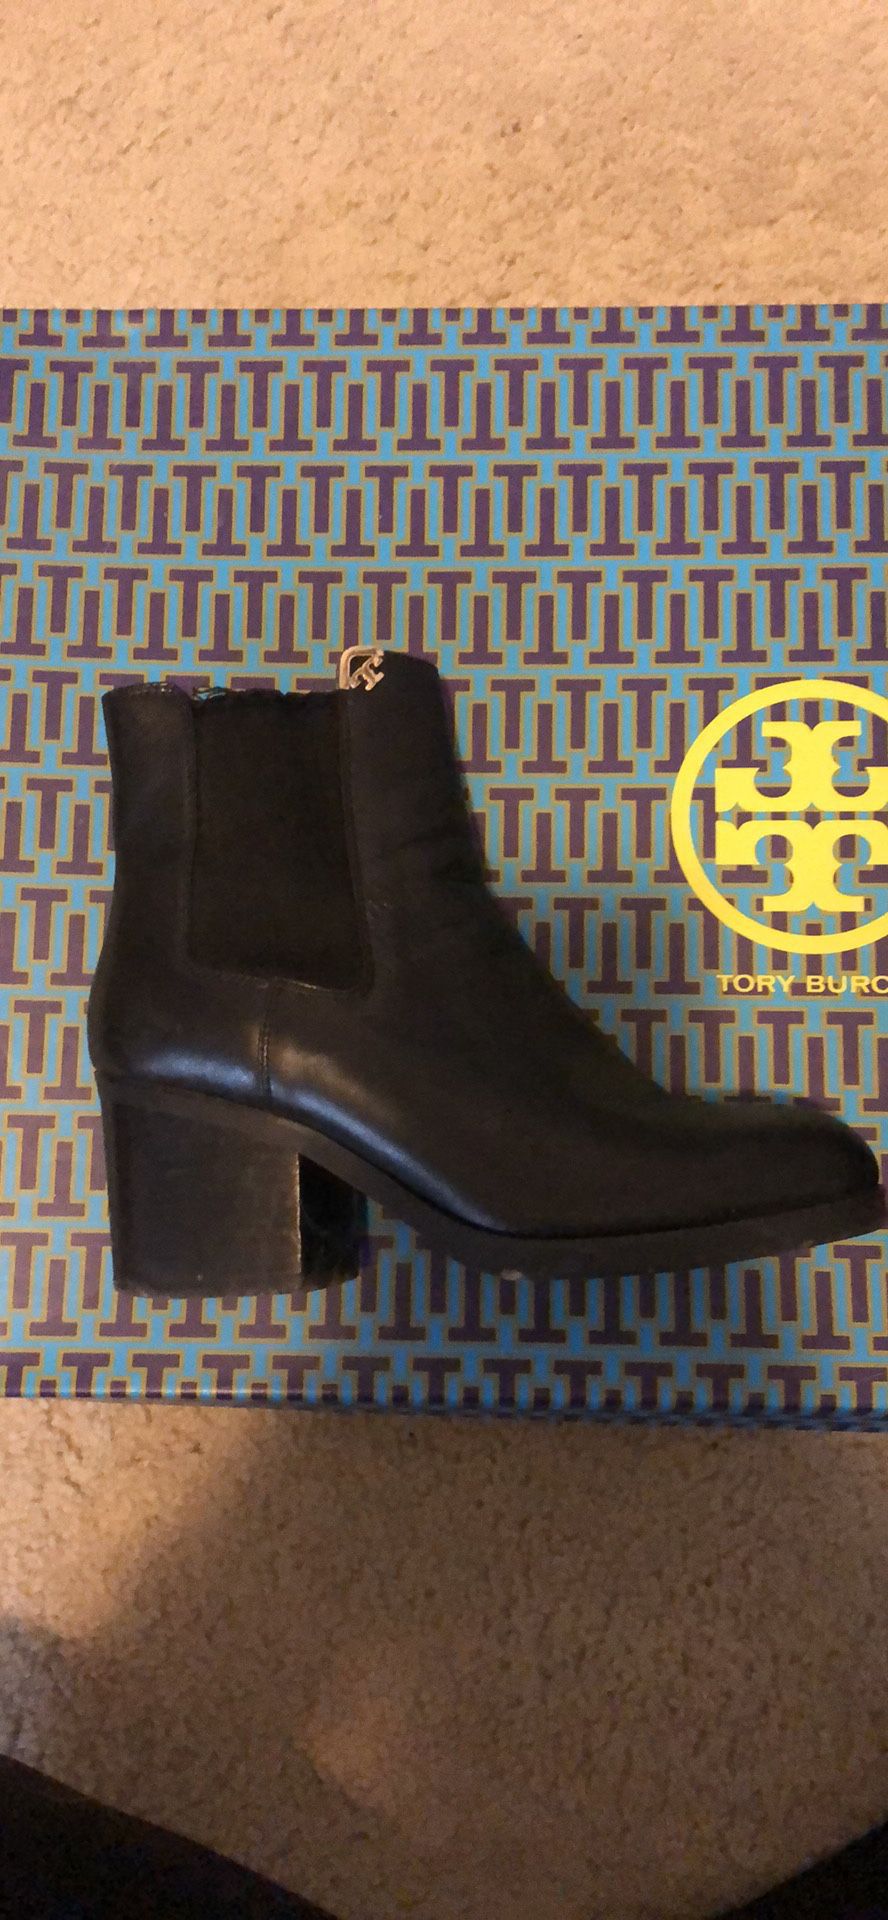 Tory Burch Leather Black Ankle Boots